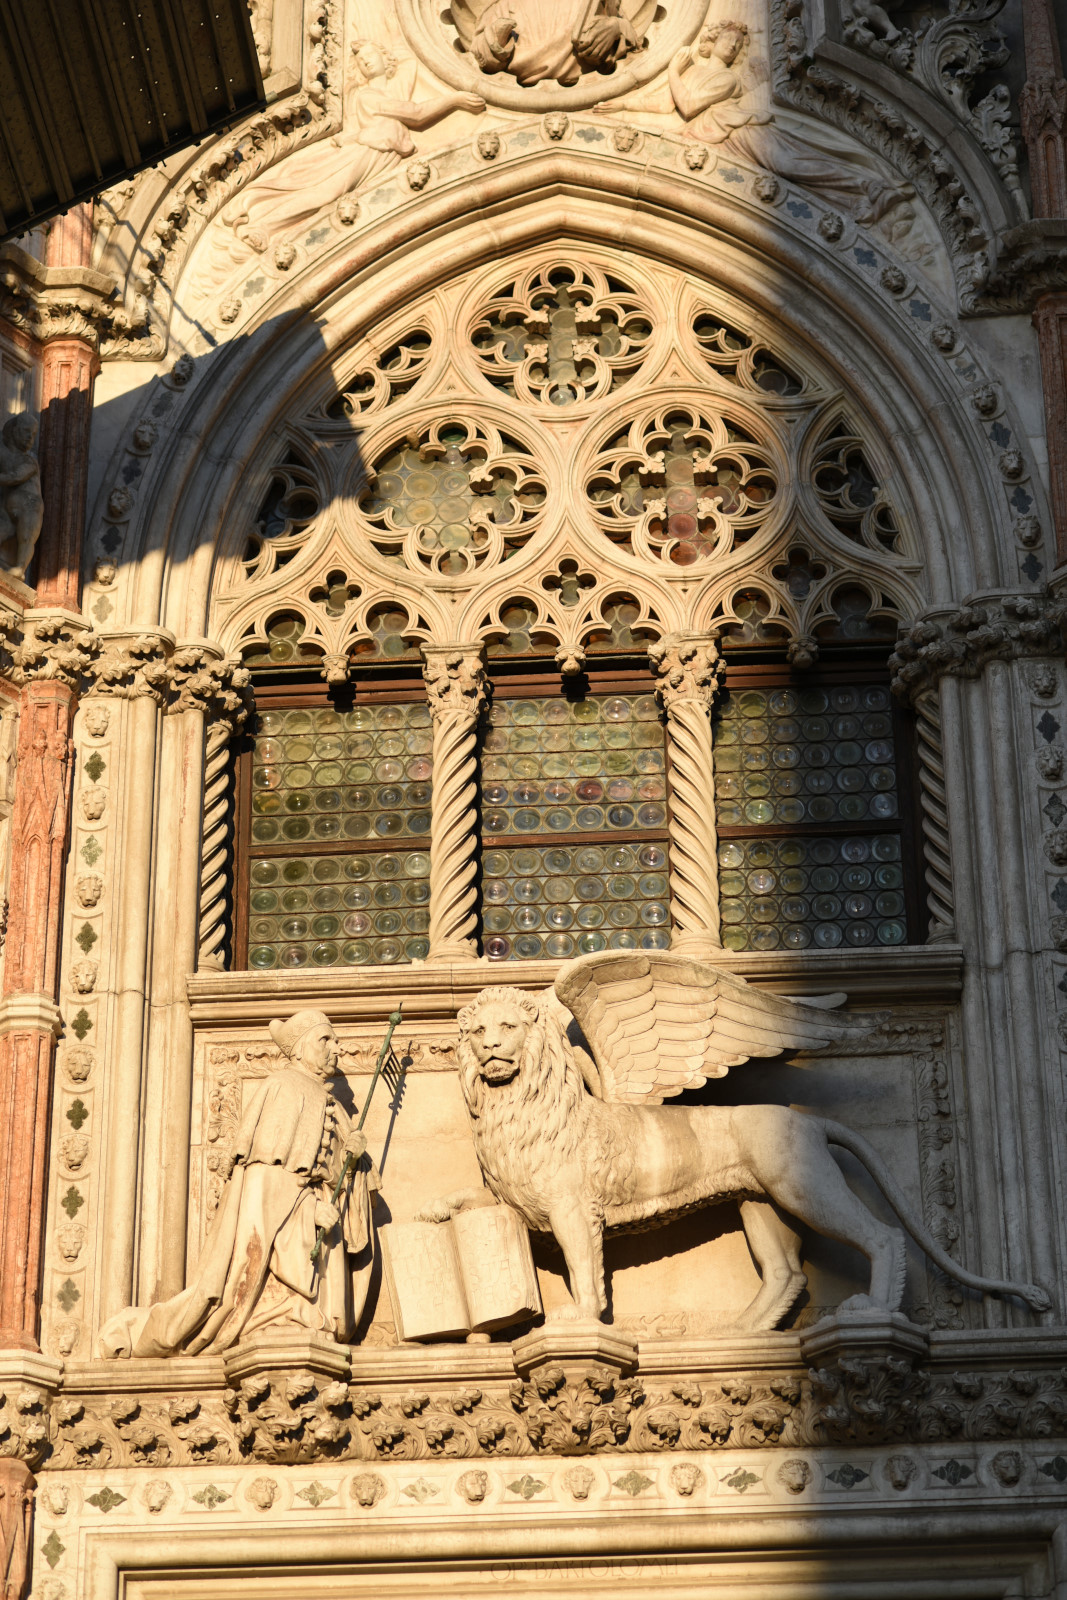 Entrance to Doges Palace, Winged lion, Doge, murano glass window, San Marco Venice. Travel and architectural photography by Kent Johnson.